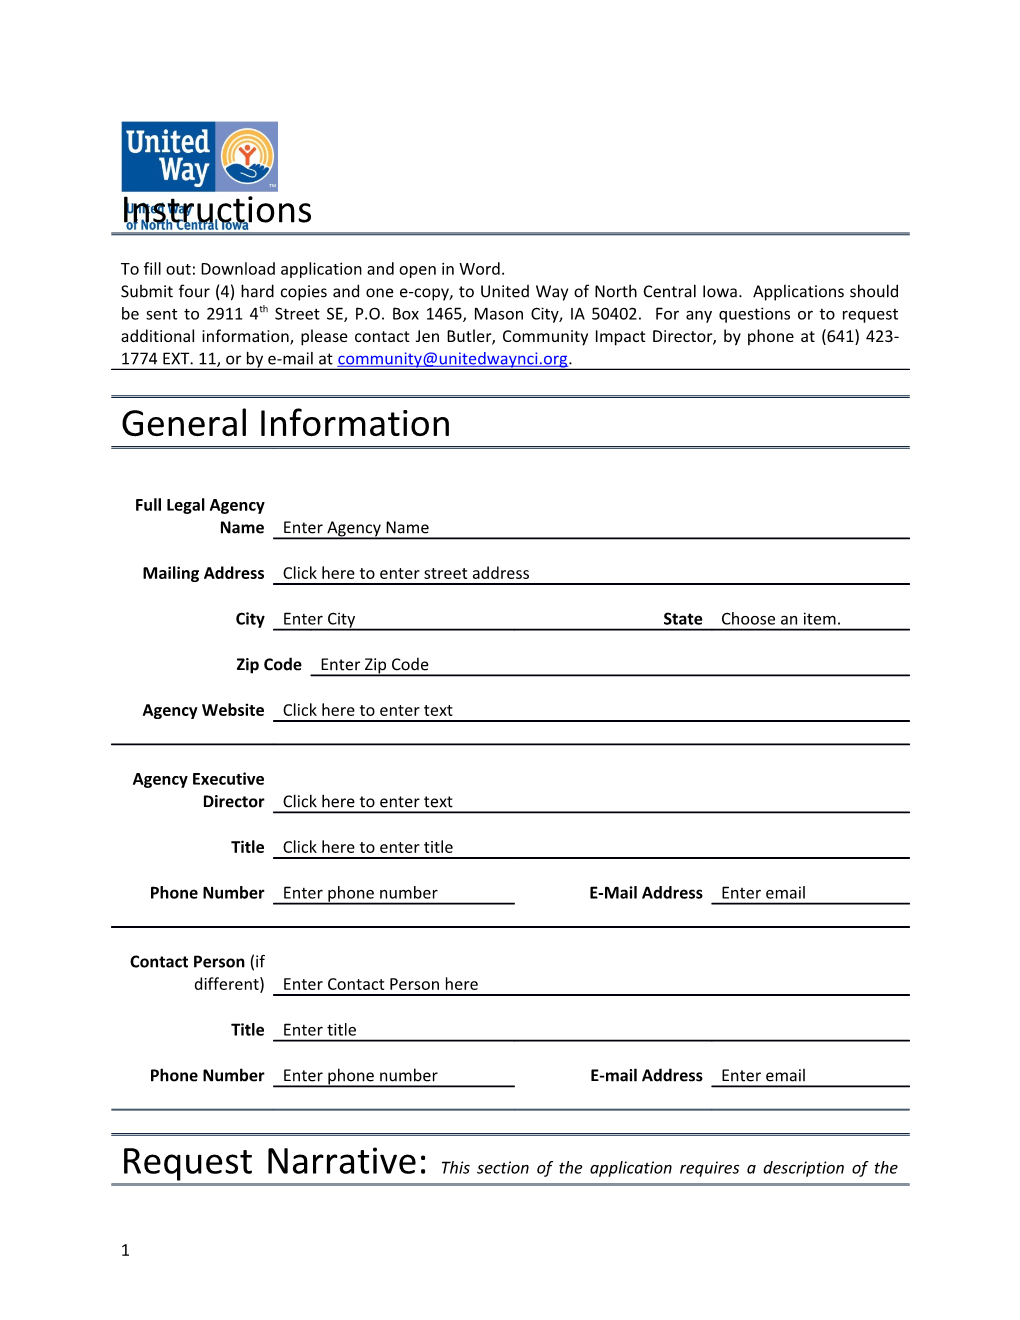 United Way of North Central Iowa Application for Venture Grant Funding